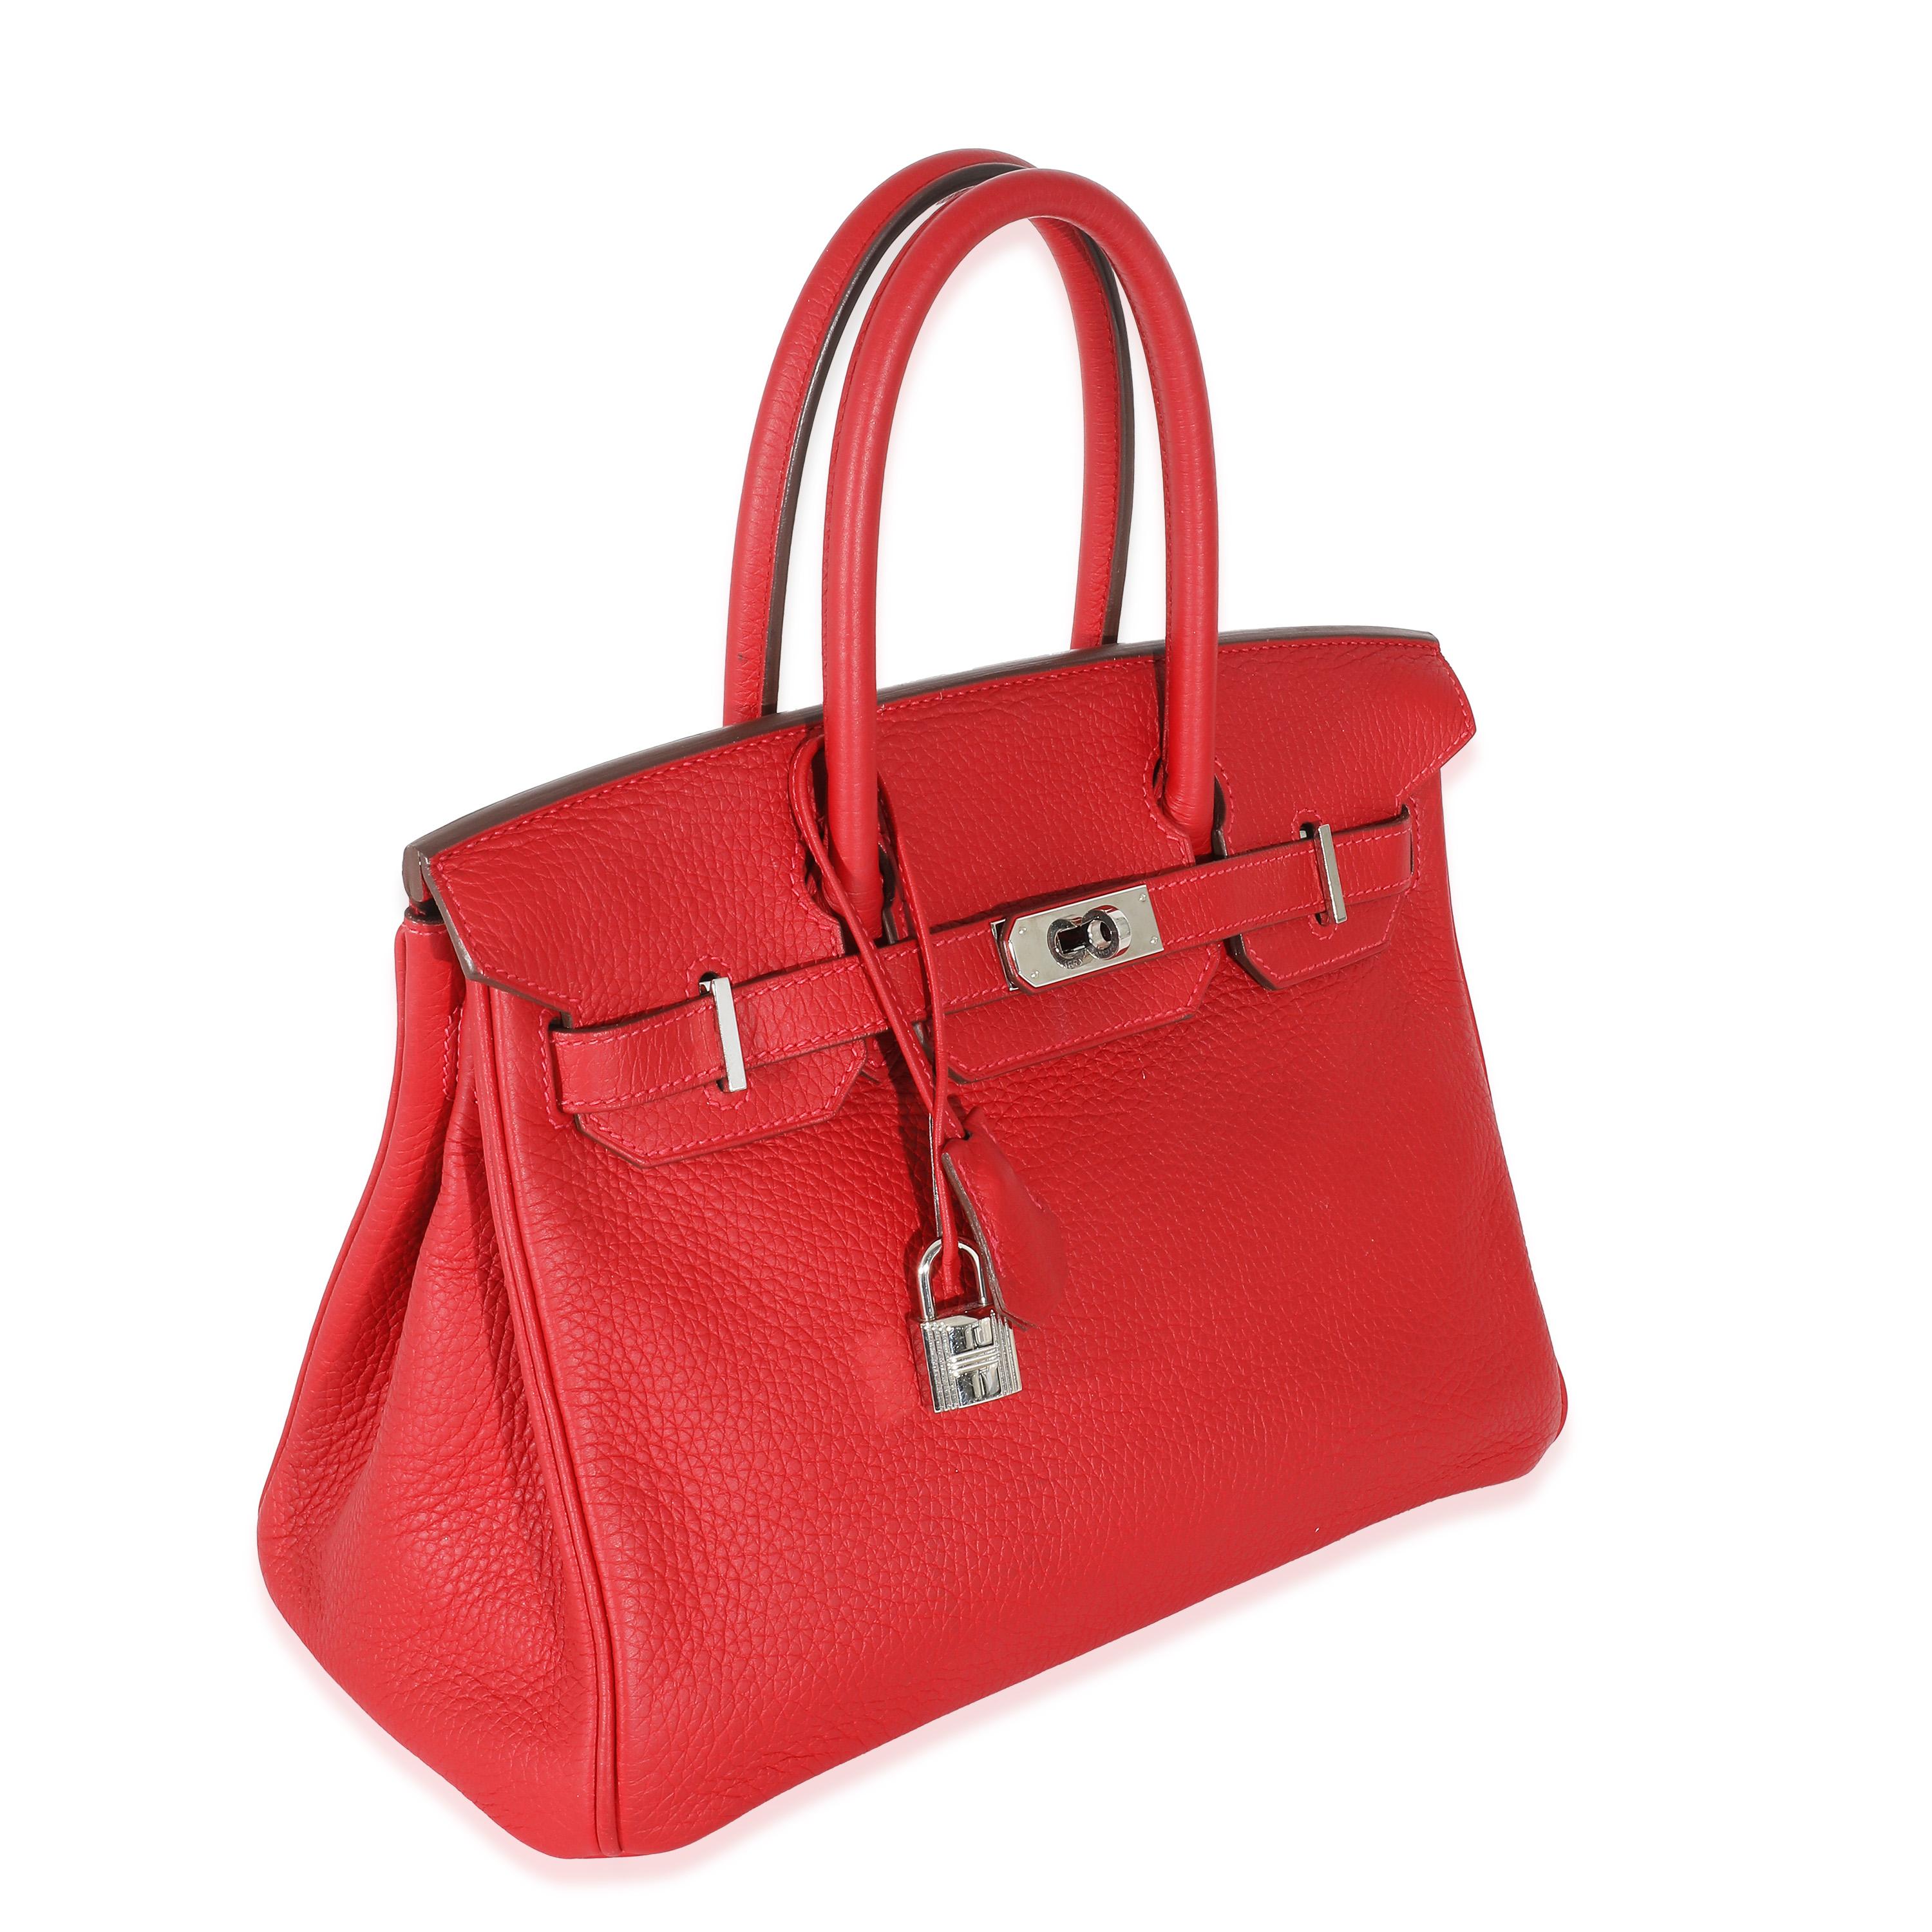 Listing Title: Hermès Rouge Casaque Clemence Birkin 30 PHW
SKU: 135999
Condition: Pre-owned 
Handbag Condition: Very Good
Condition Comments: Item is in very good condition with minor signs of wear.  Mild scuffing along piping. and handles.